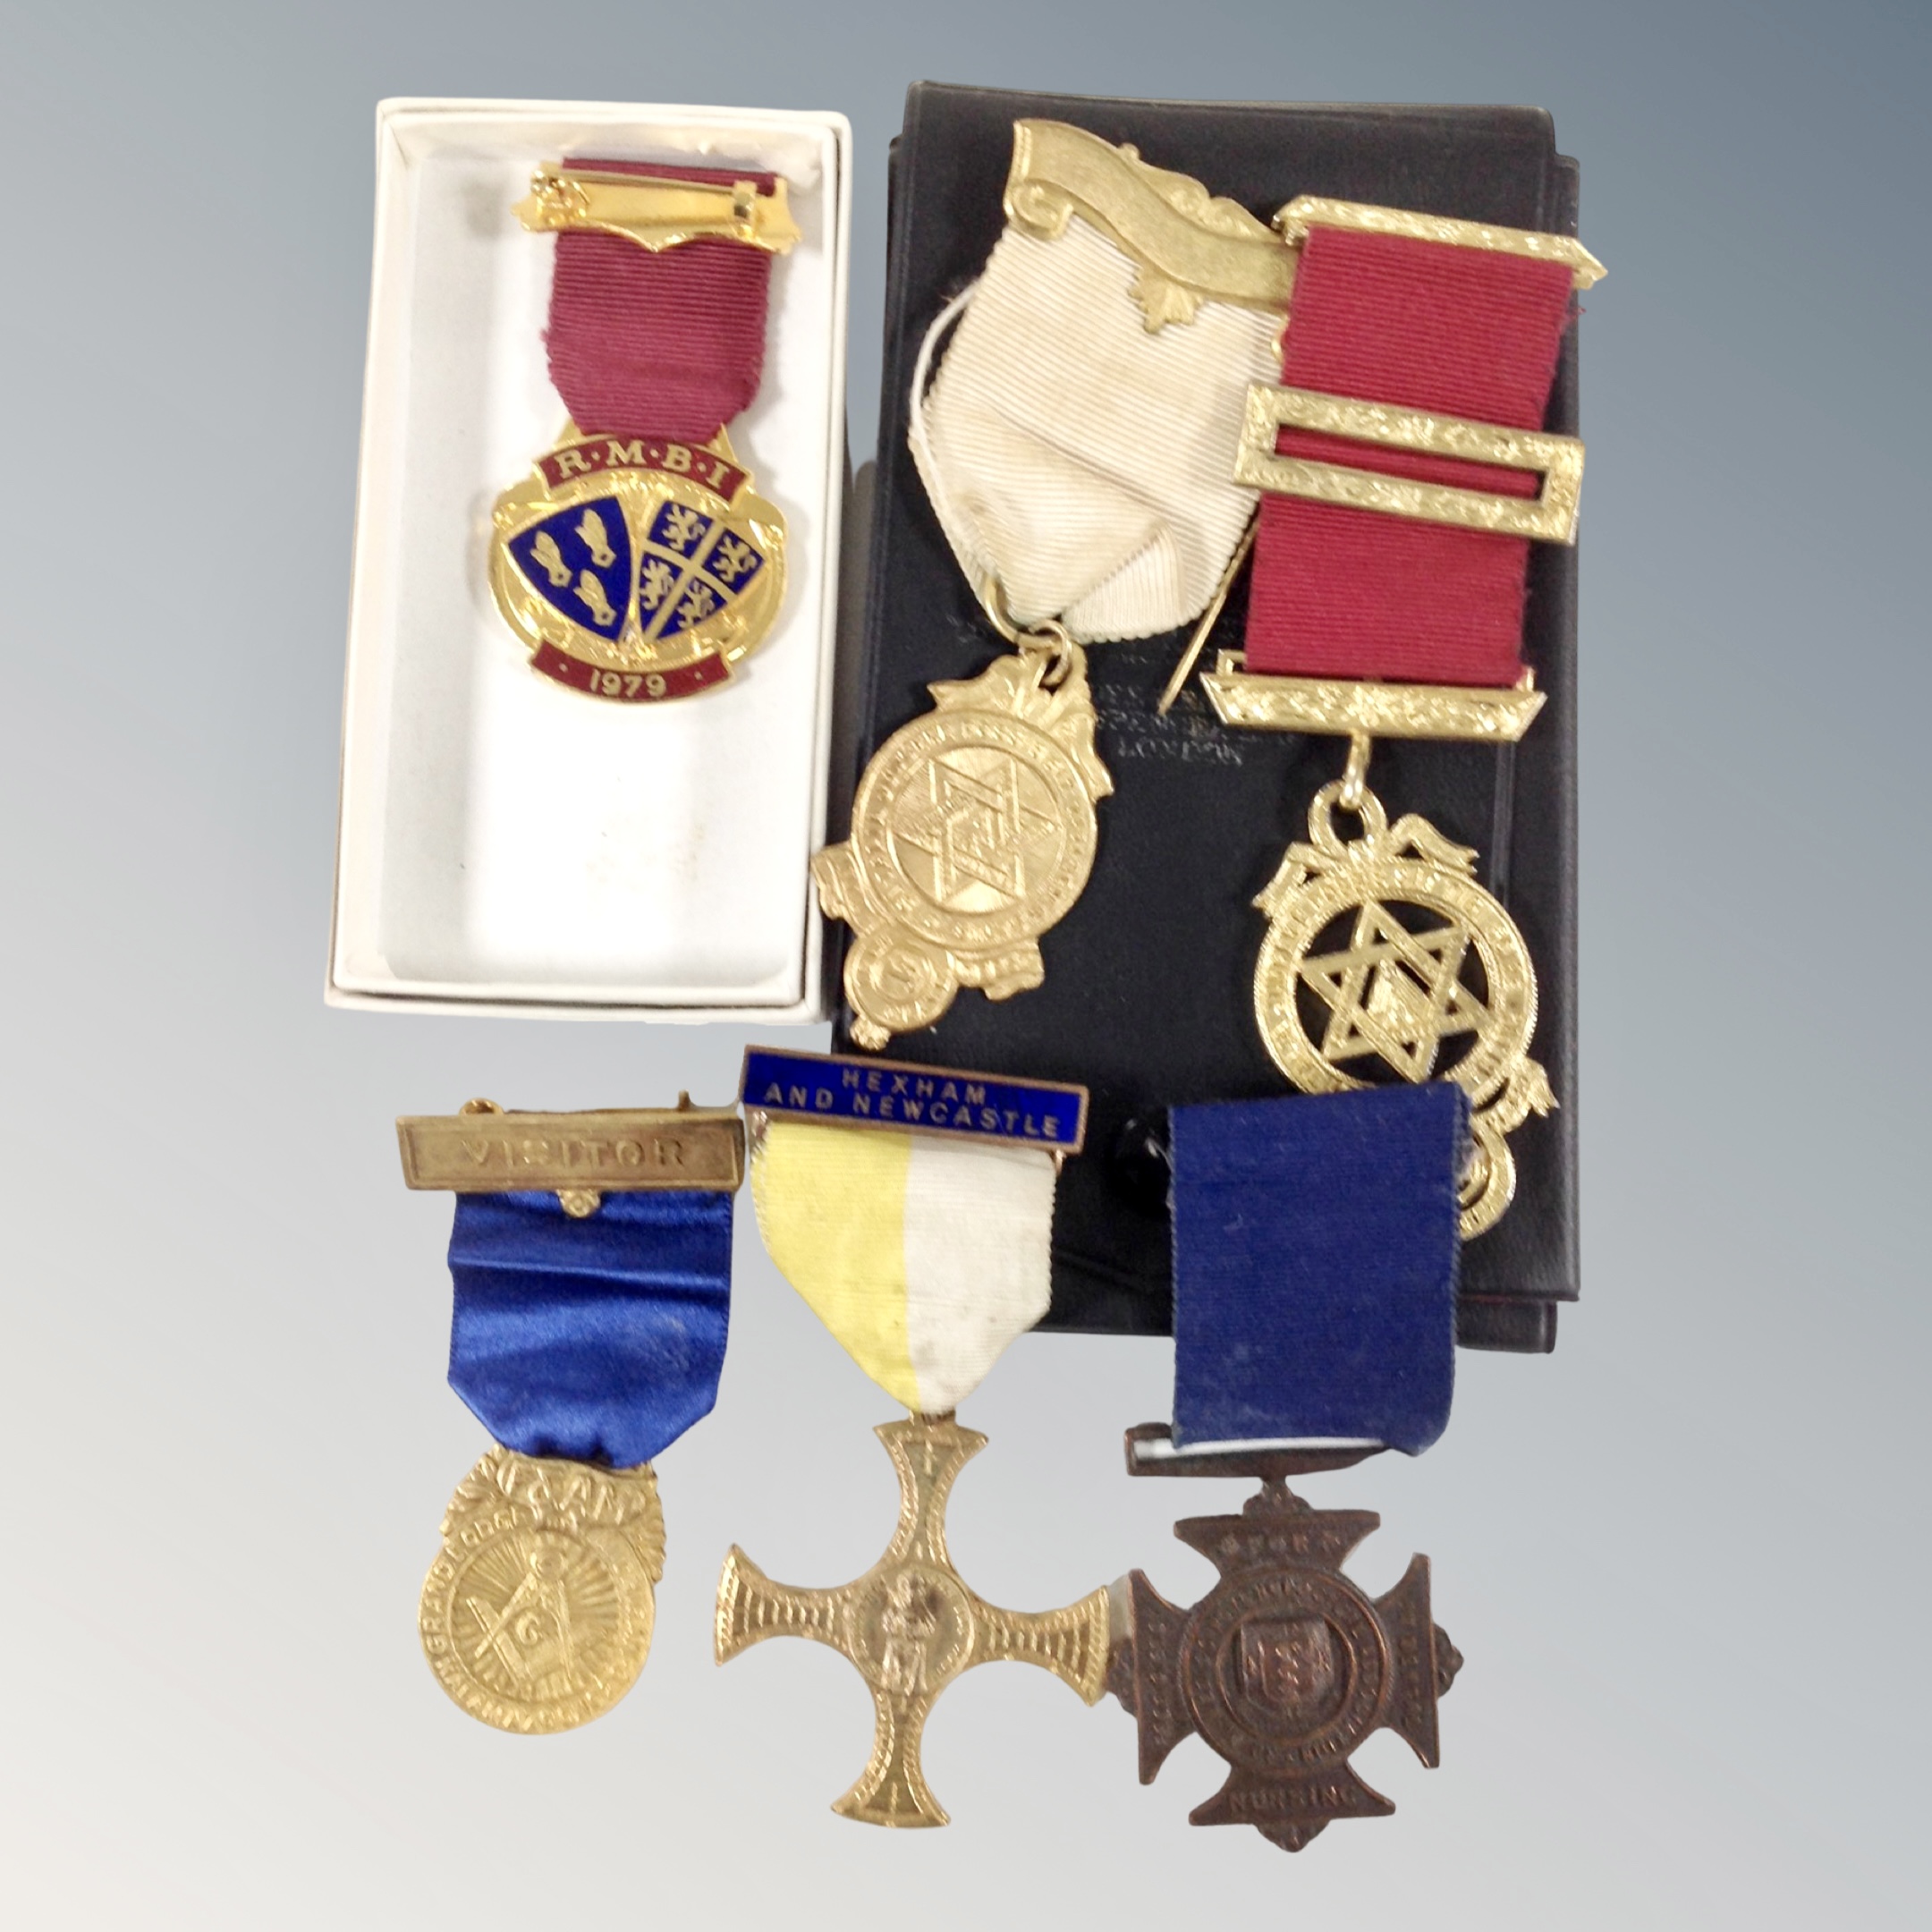 A group of six medals on ribbons, Masonic and Steward medals,